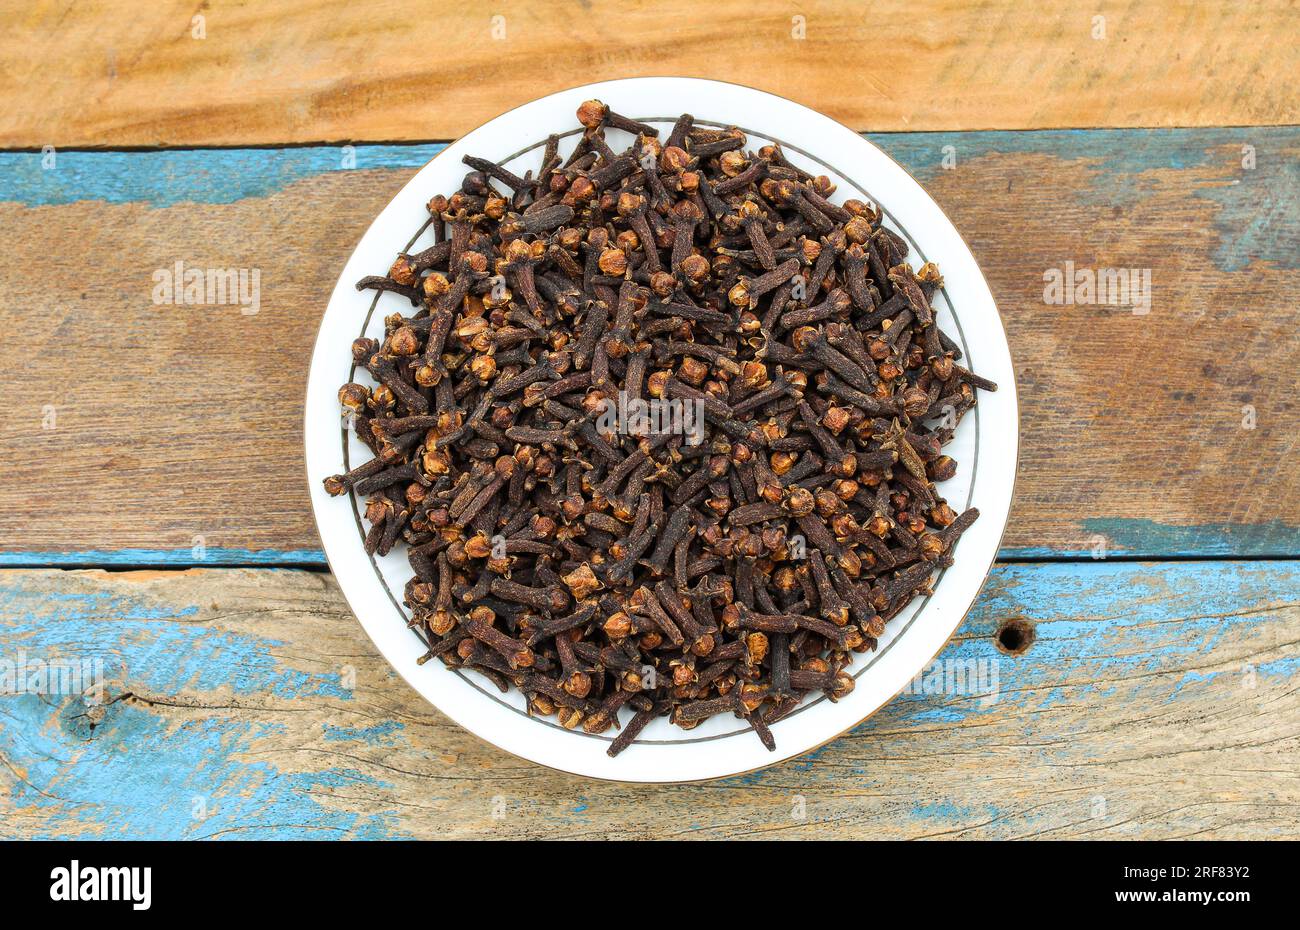 Dried Cloves in a plate on wooden background top view Stock Photo